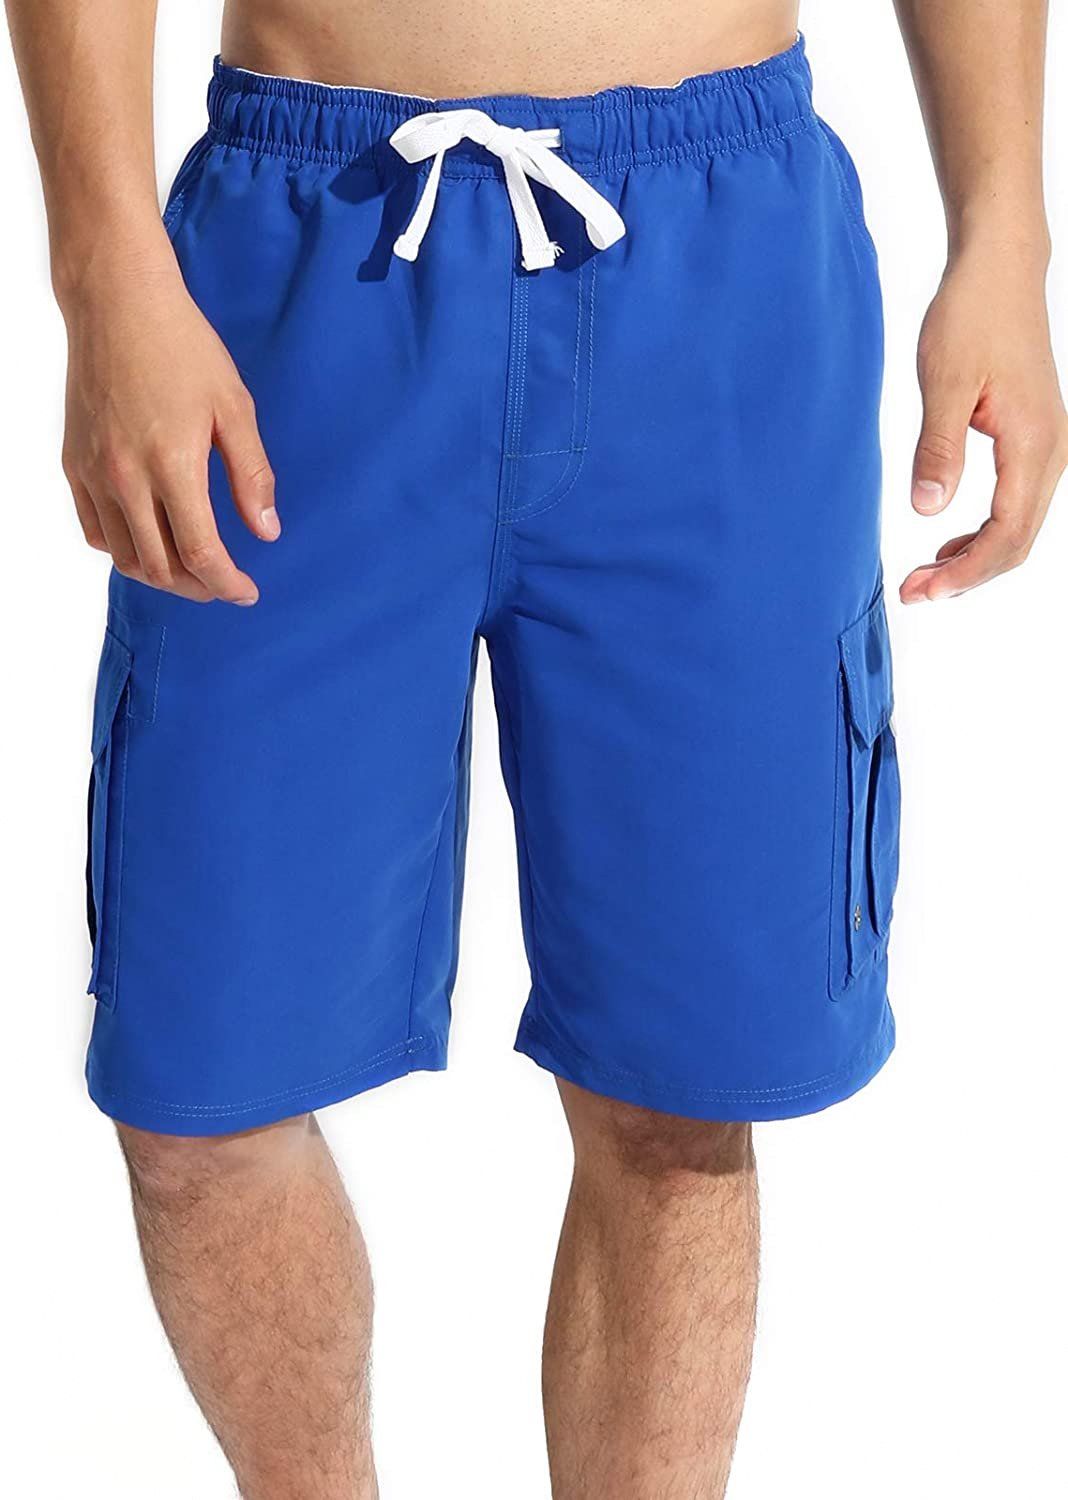 Actleis Mens Swim Trunks Board Shorts Long Quick Dry Swim Shorts with Mesh Lining us-g5183 